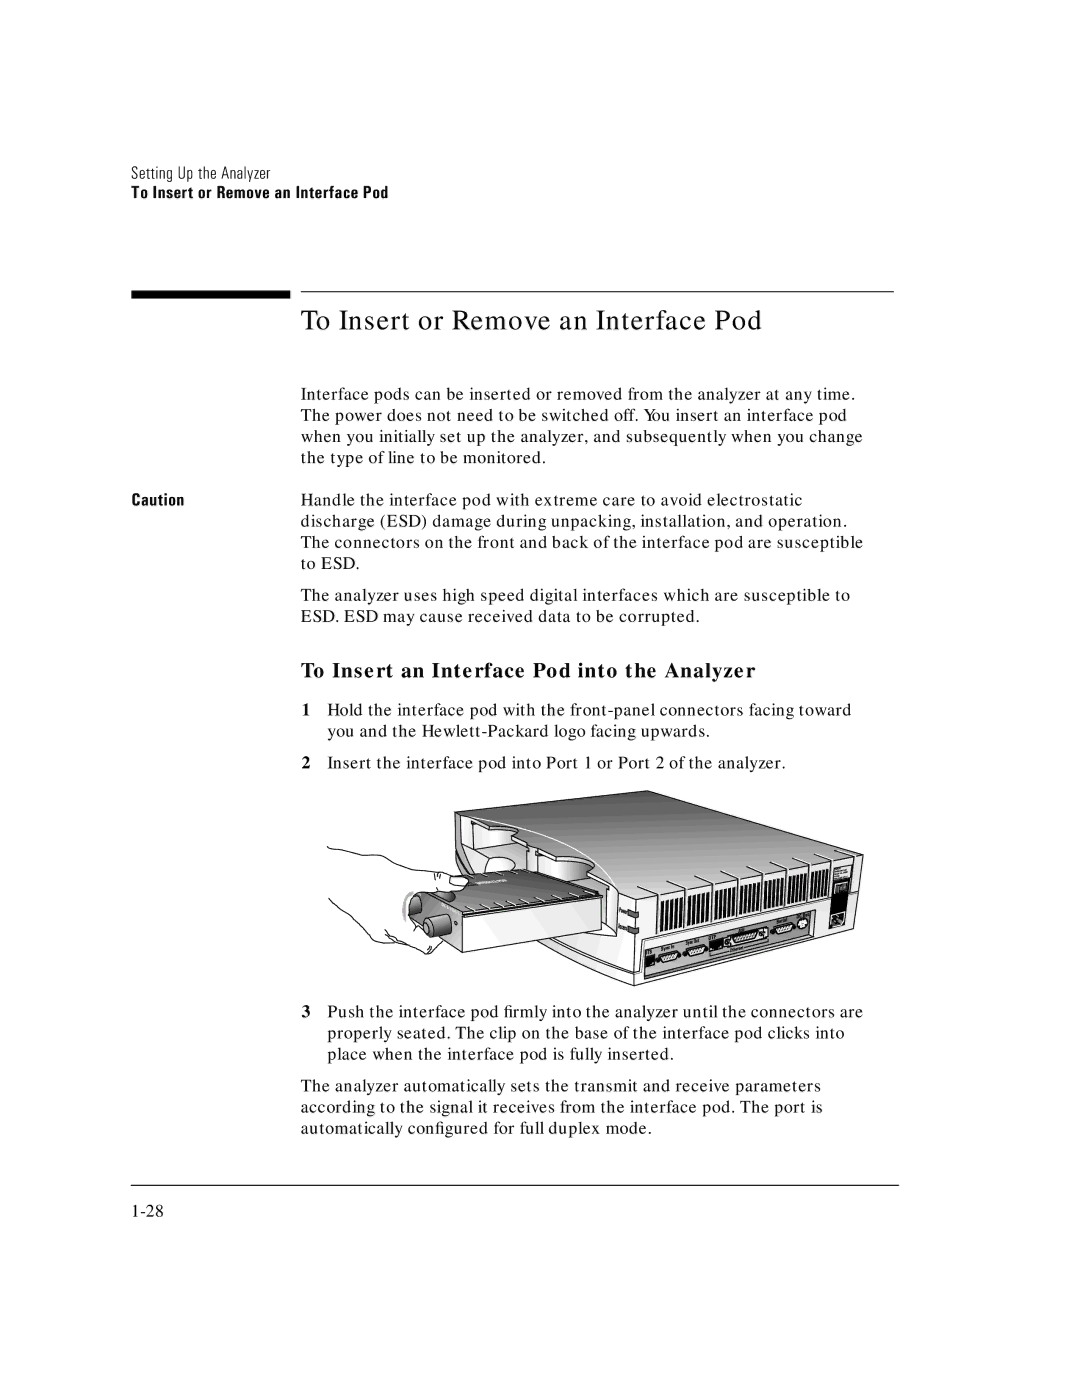 HP E5200A manual To Insert or Remove an Interface Pod, To Insert an Interface Pod into the Analyzer 